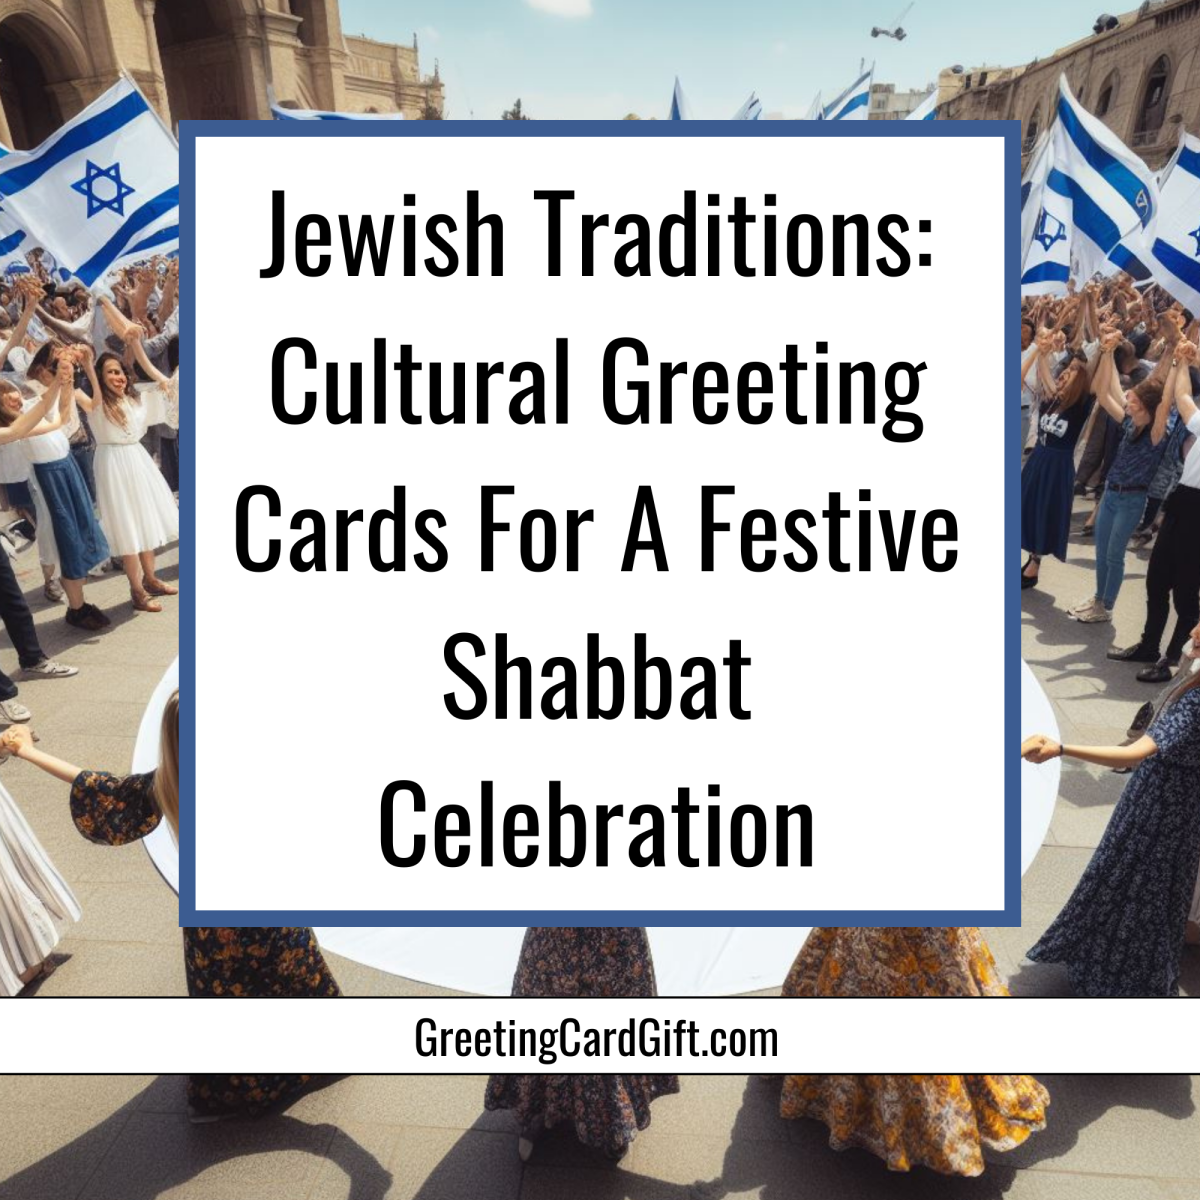 Jewish Traditions: Cultural Greeting Cards For A Festive Shabbat Celebration